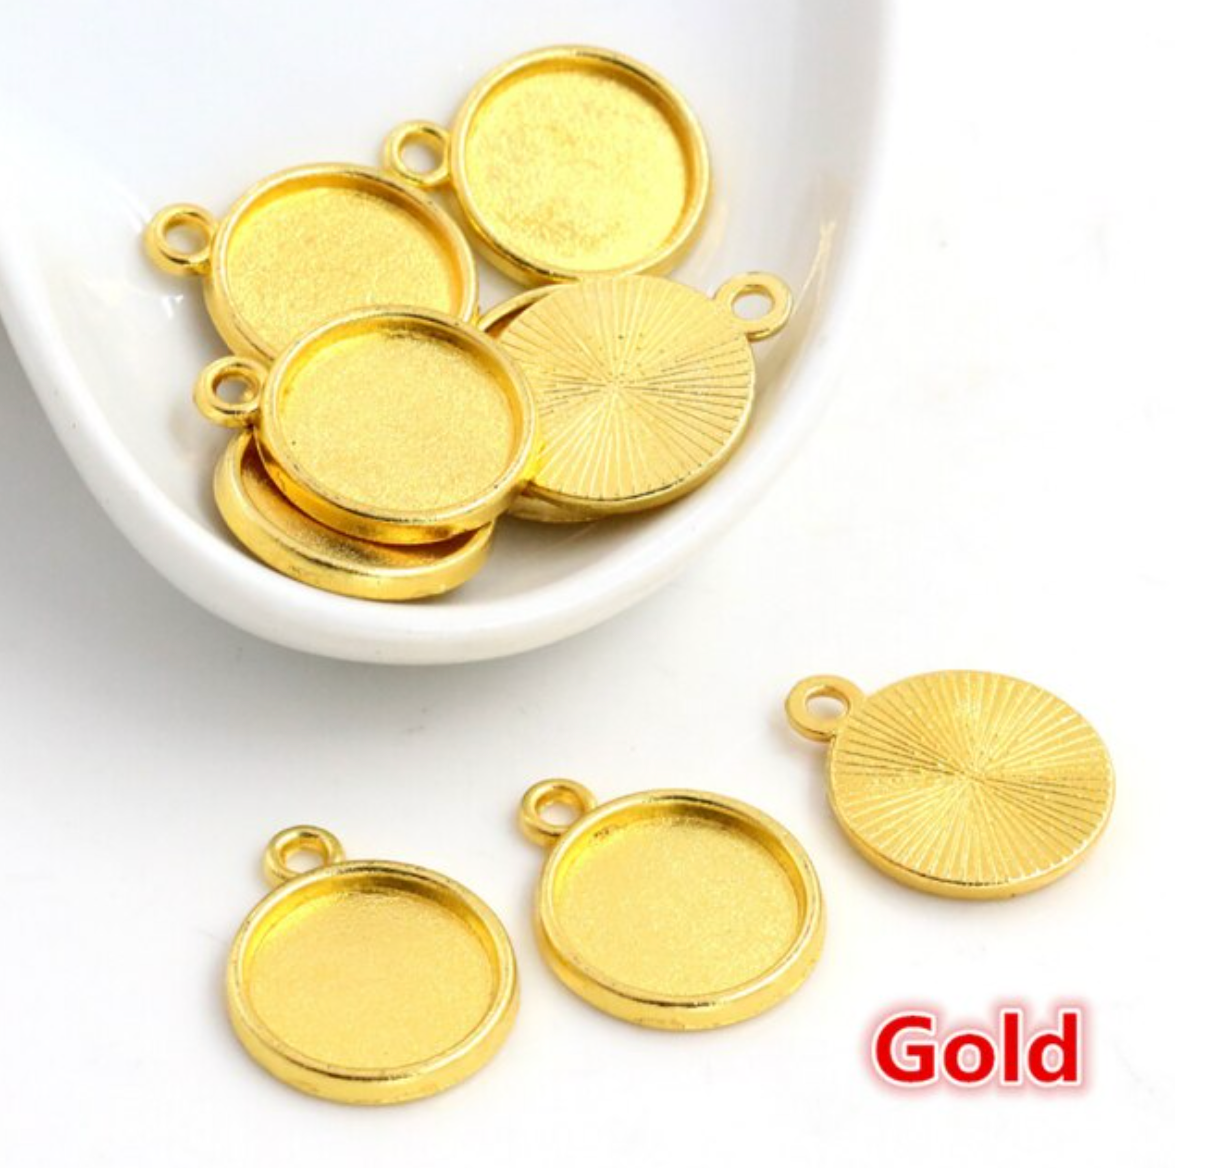 5pcs, 12mm Inner Setting,  High Quality Iron Material Pendant Cabochon I - choose your colour